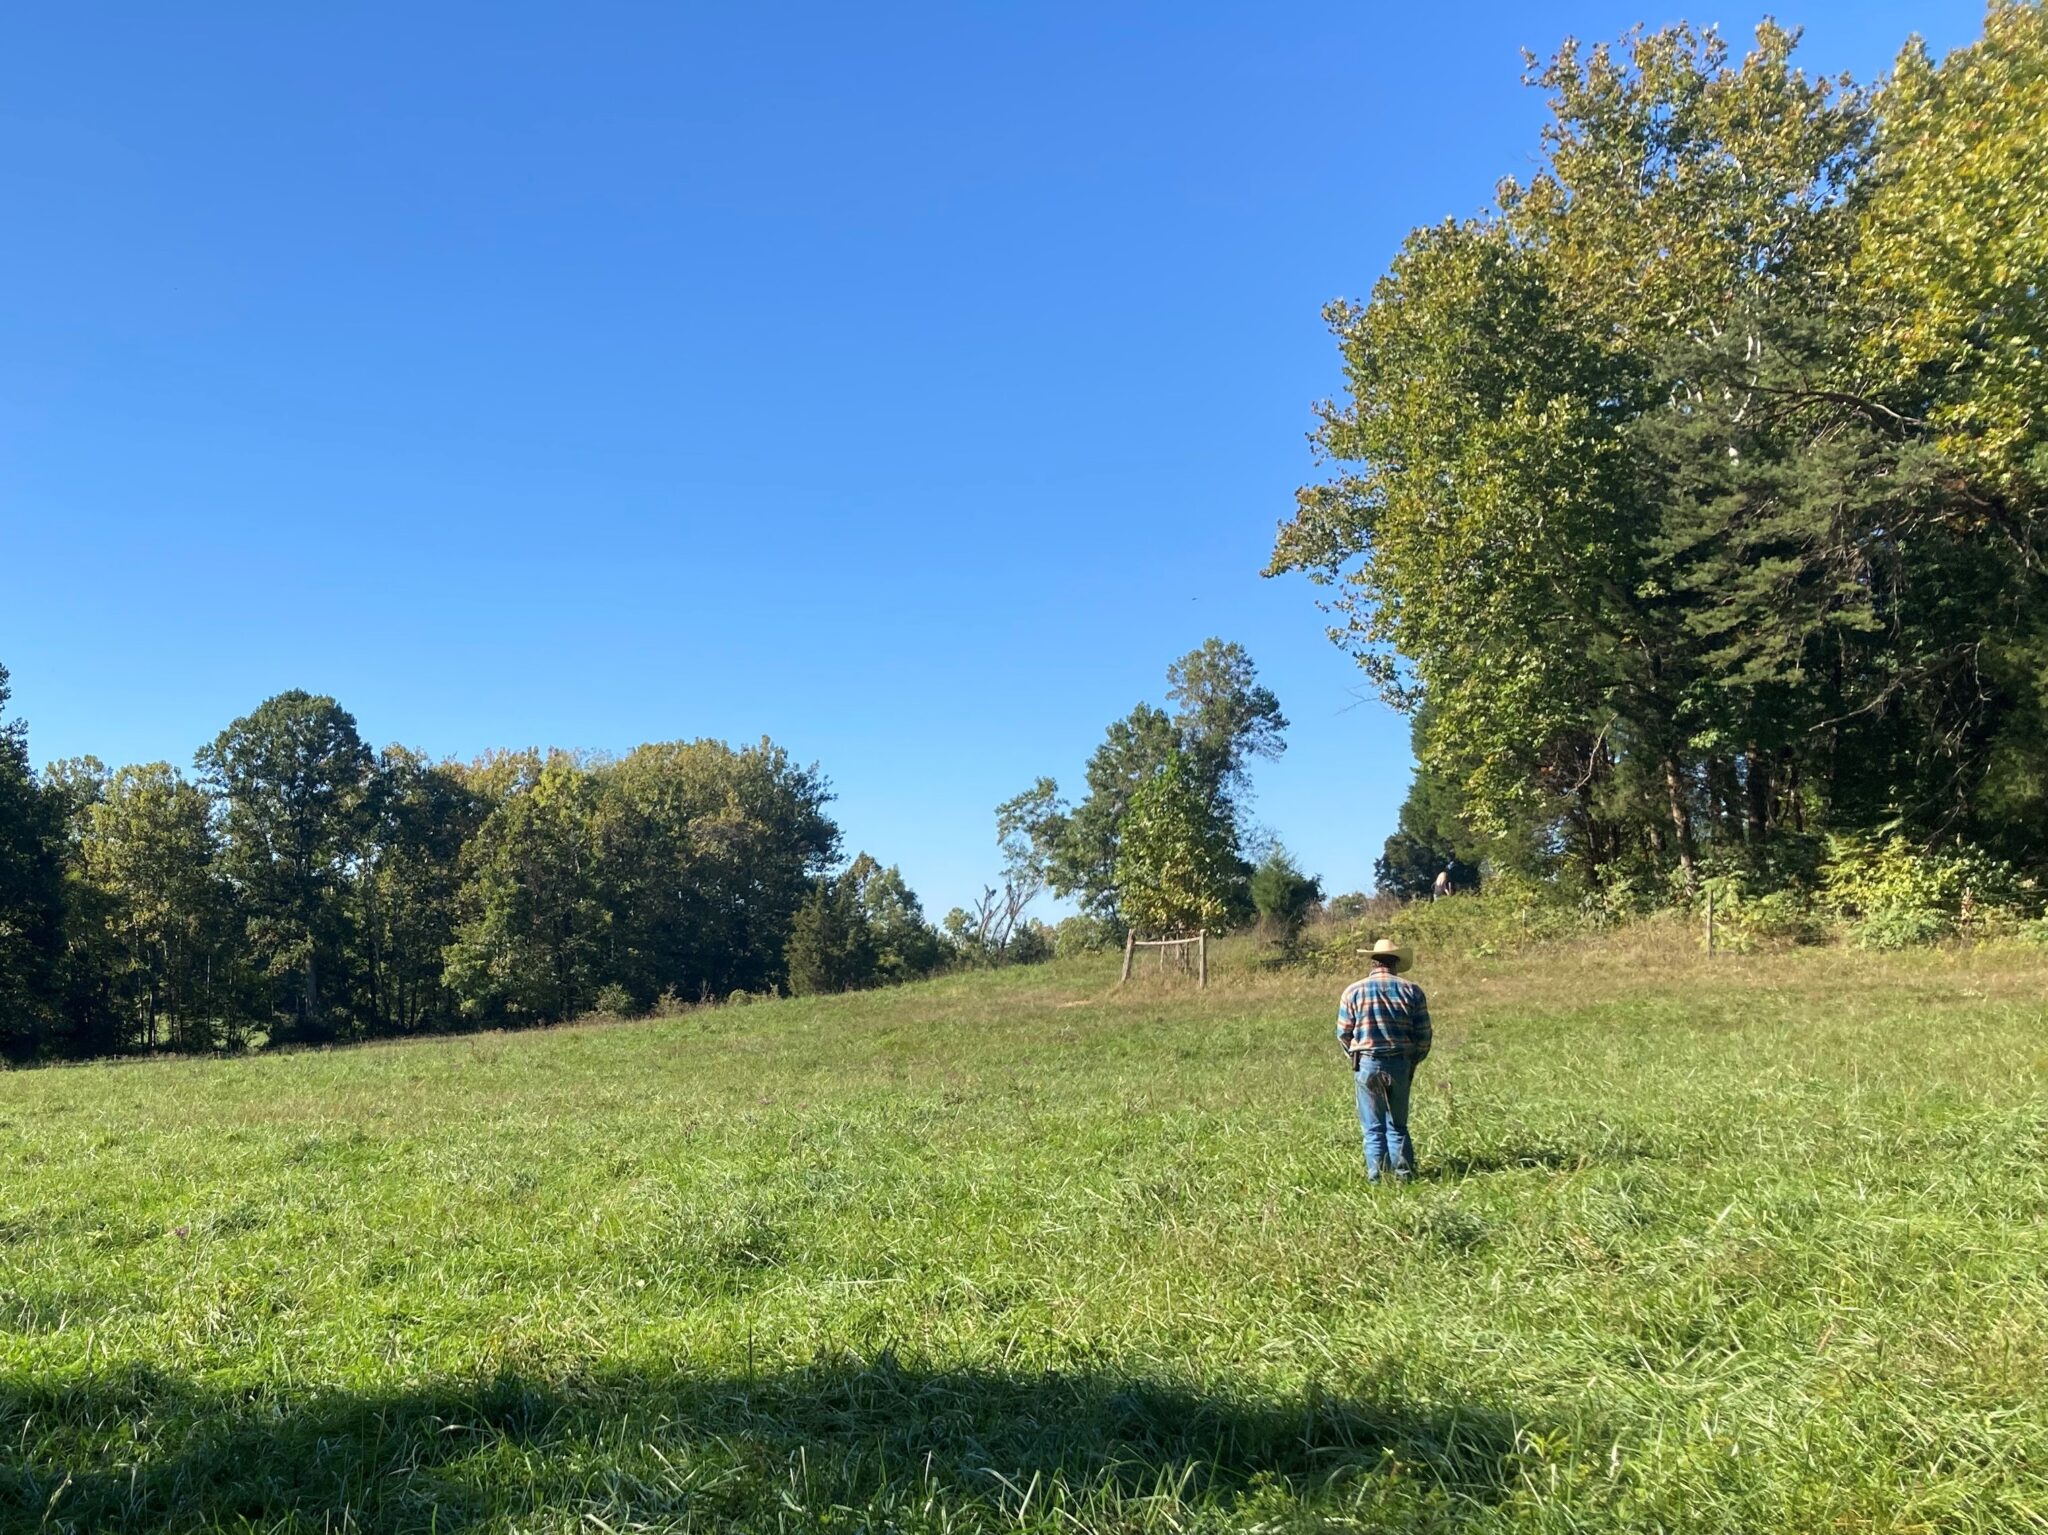 Taking time to evaluate pasture condition weekly with follow through of taking care of potential concerns like overgrazing and pests (insects, weeds, disease) is an important practice.